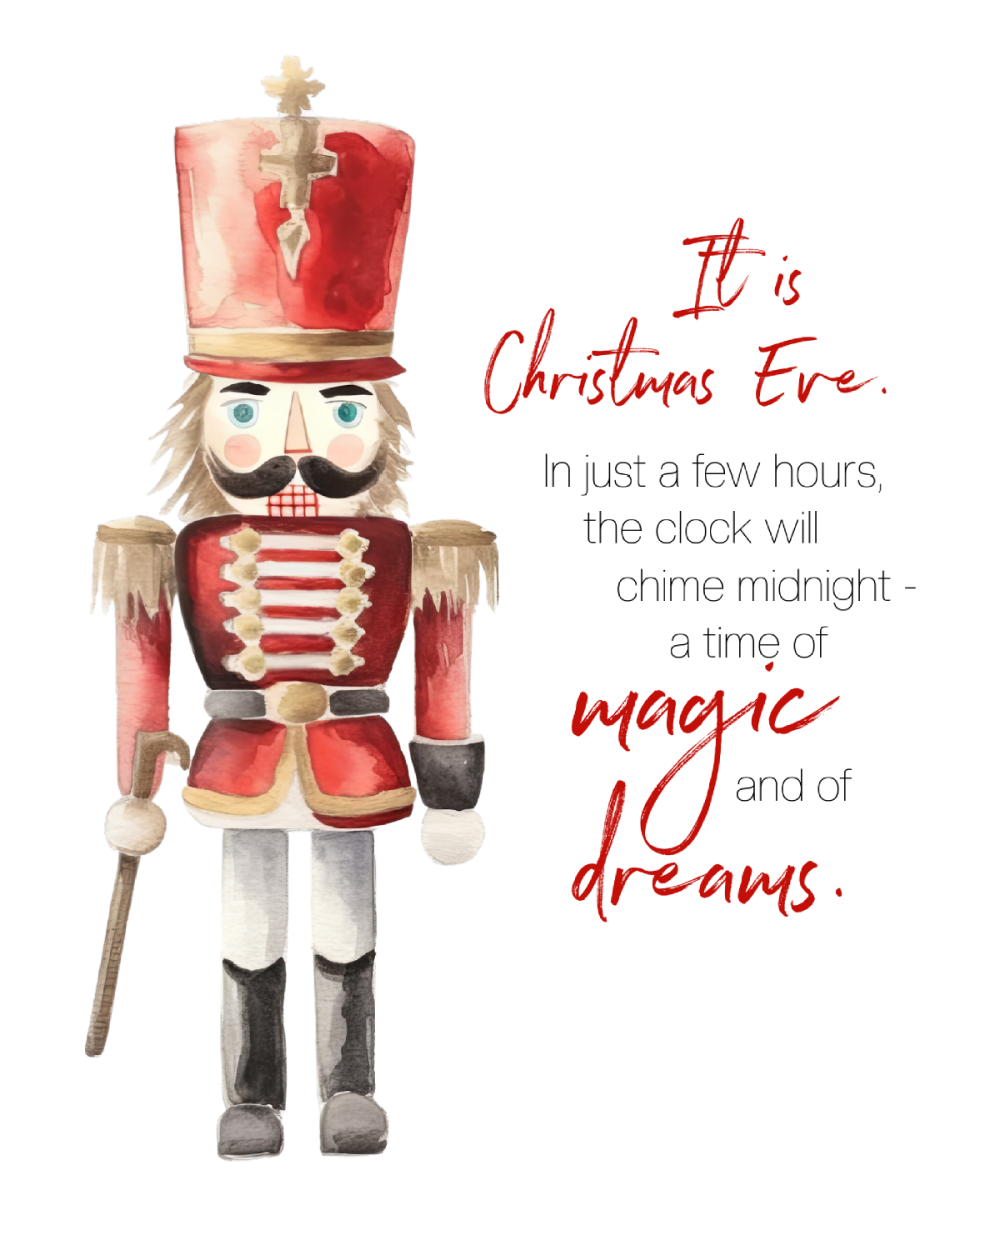 Nutcracker Christmas printable with nutcracker soldier and quote from The Nutcracker.